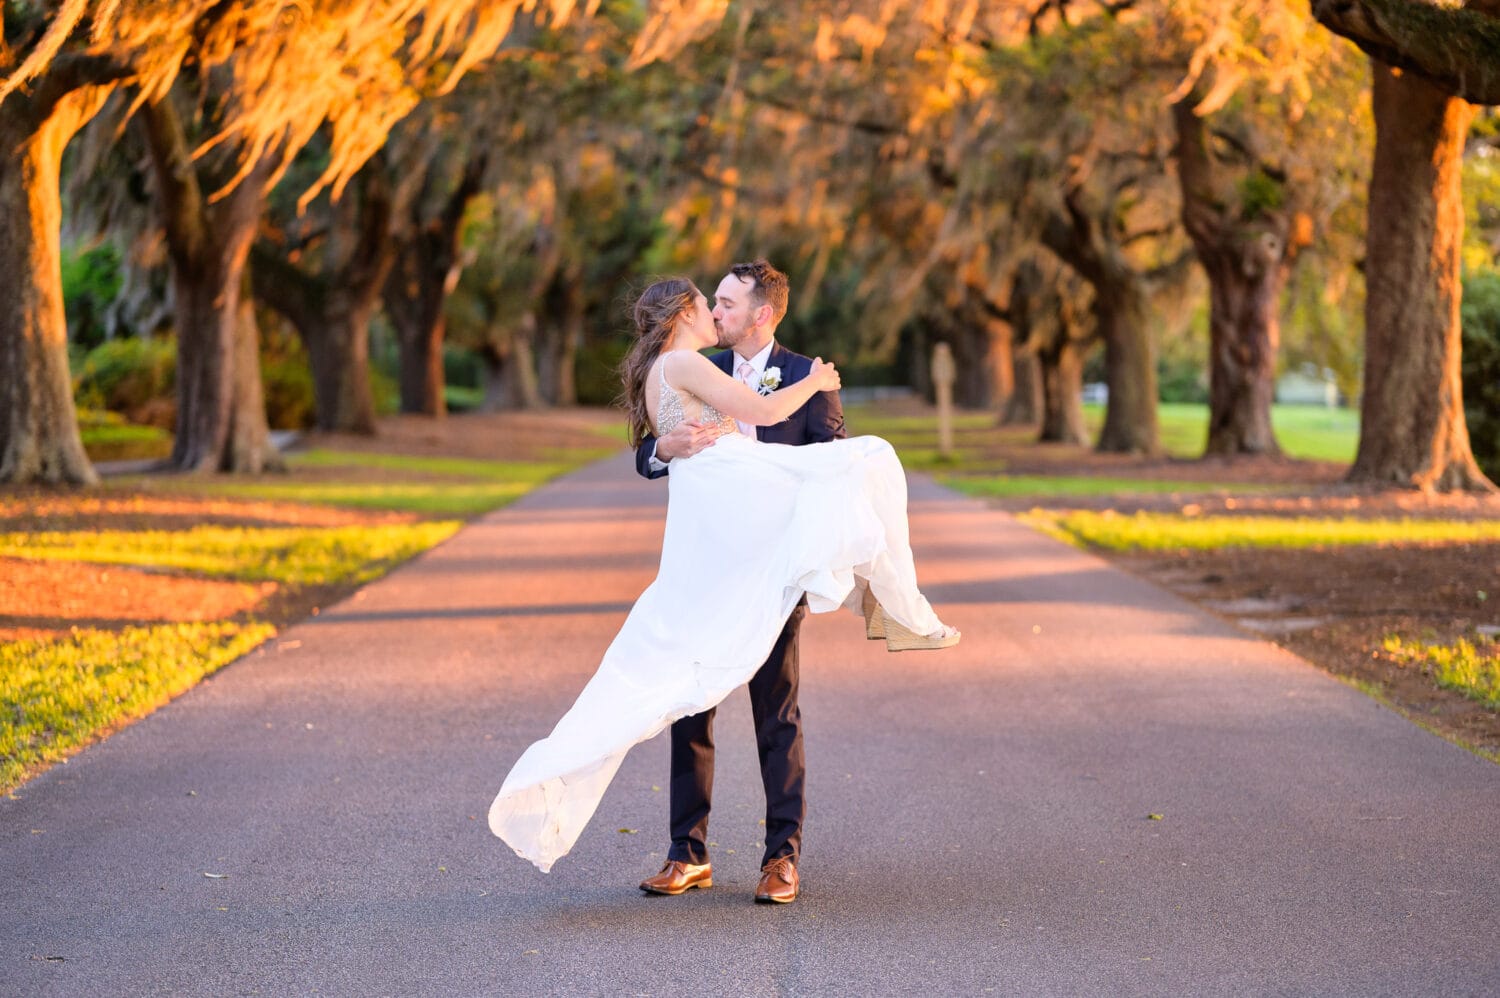 Lifting bride off the ground for a kiss - Caledonia Golf & Fish Club